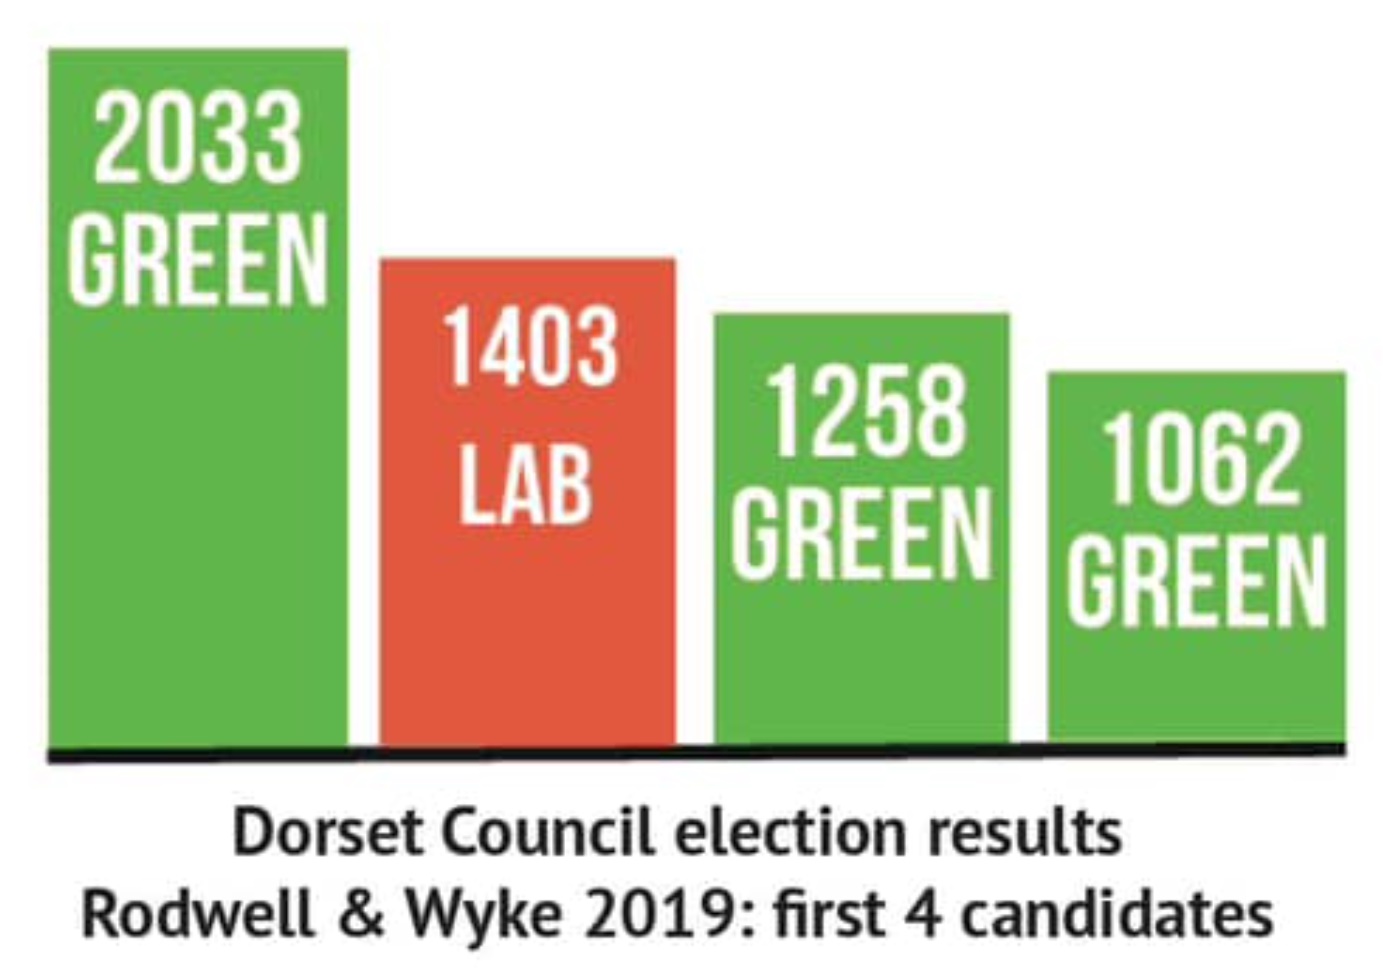 Dorset Council election result 2019 - Rodwell & Wyke ward